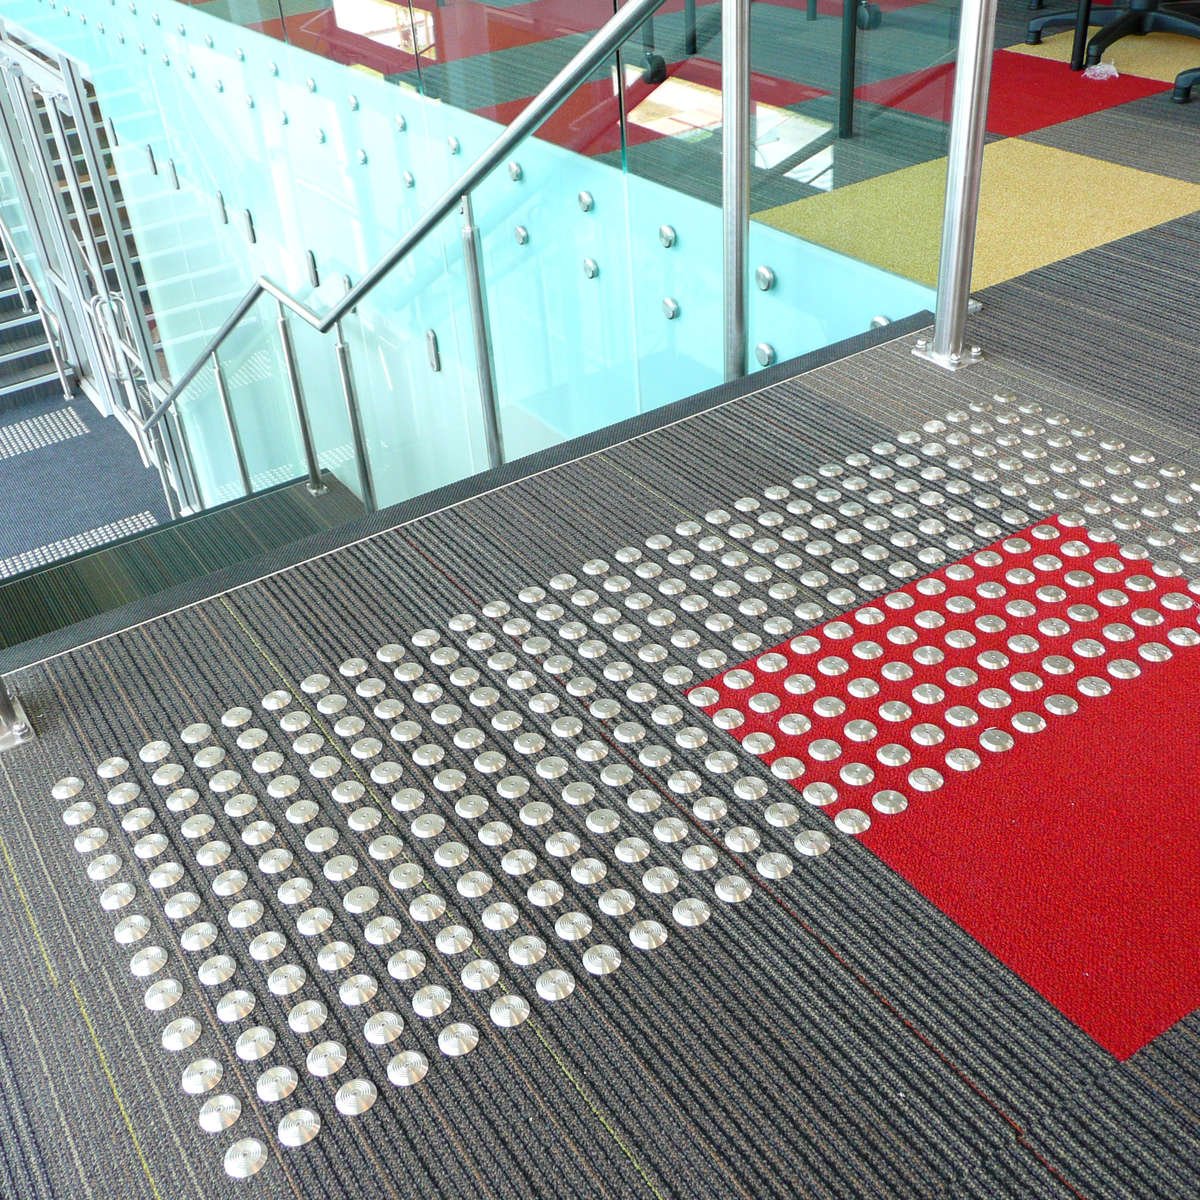 TacPro stainless steel tactile indicators on grey/red carpet at top of stairs